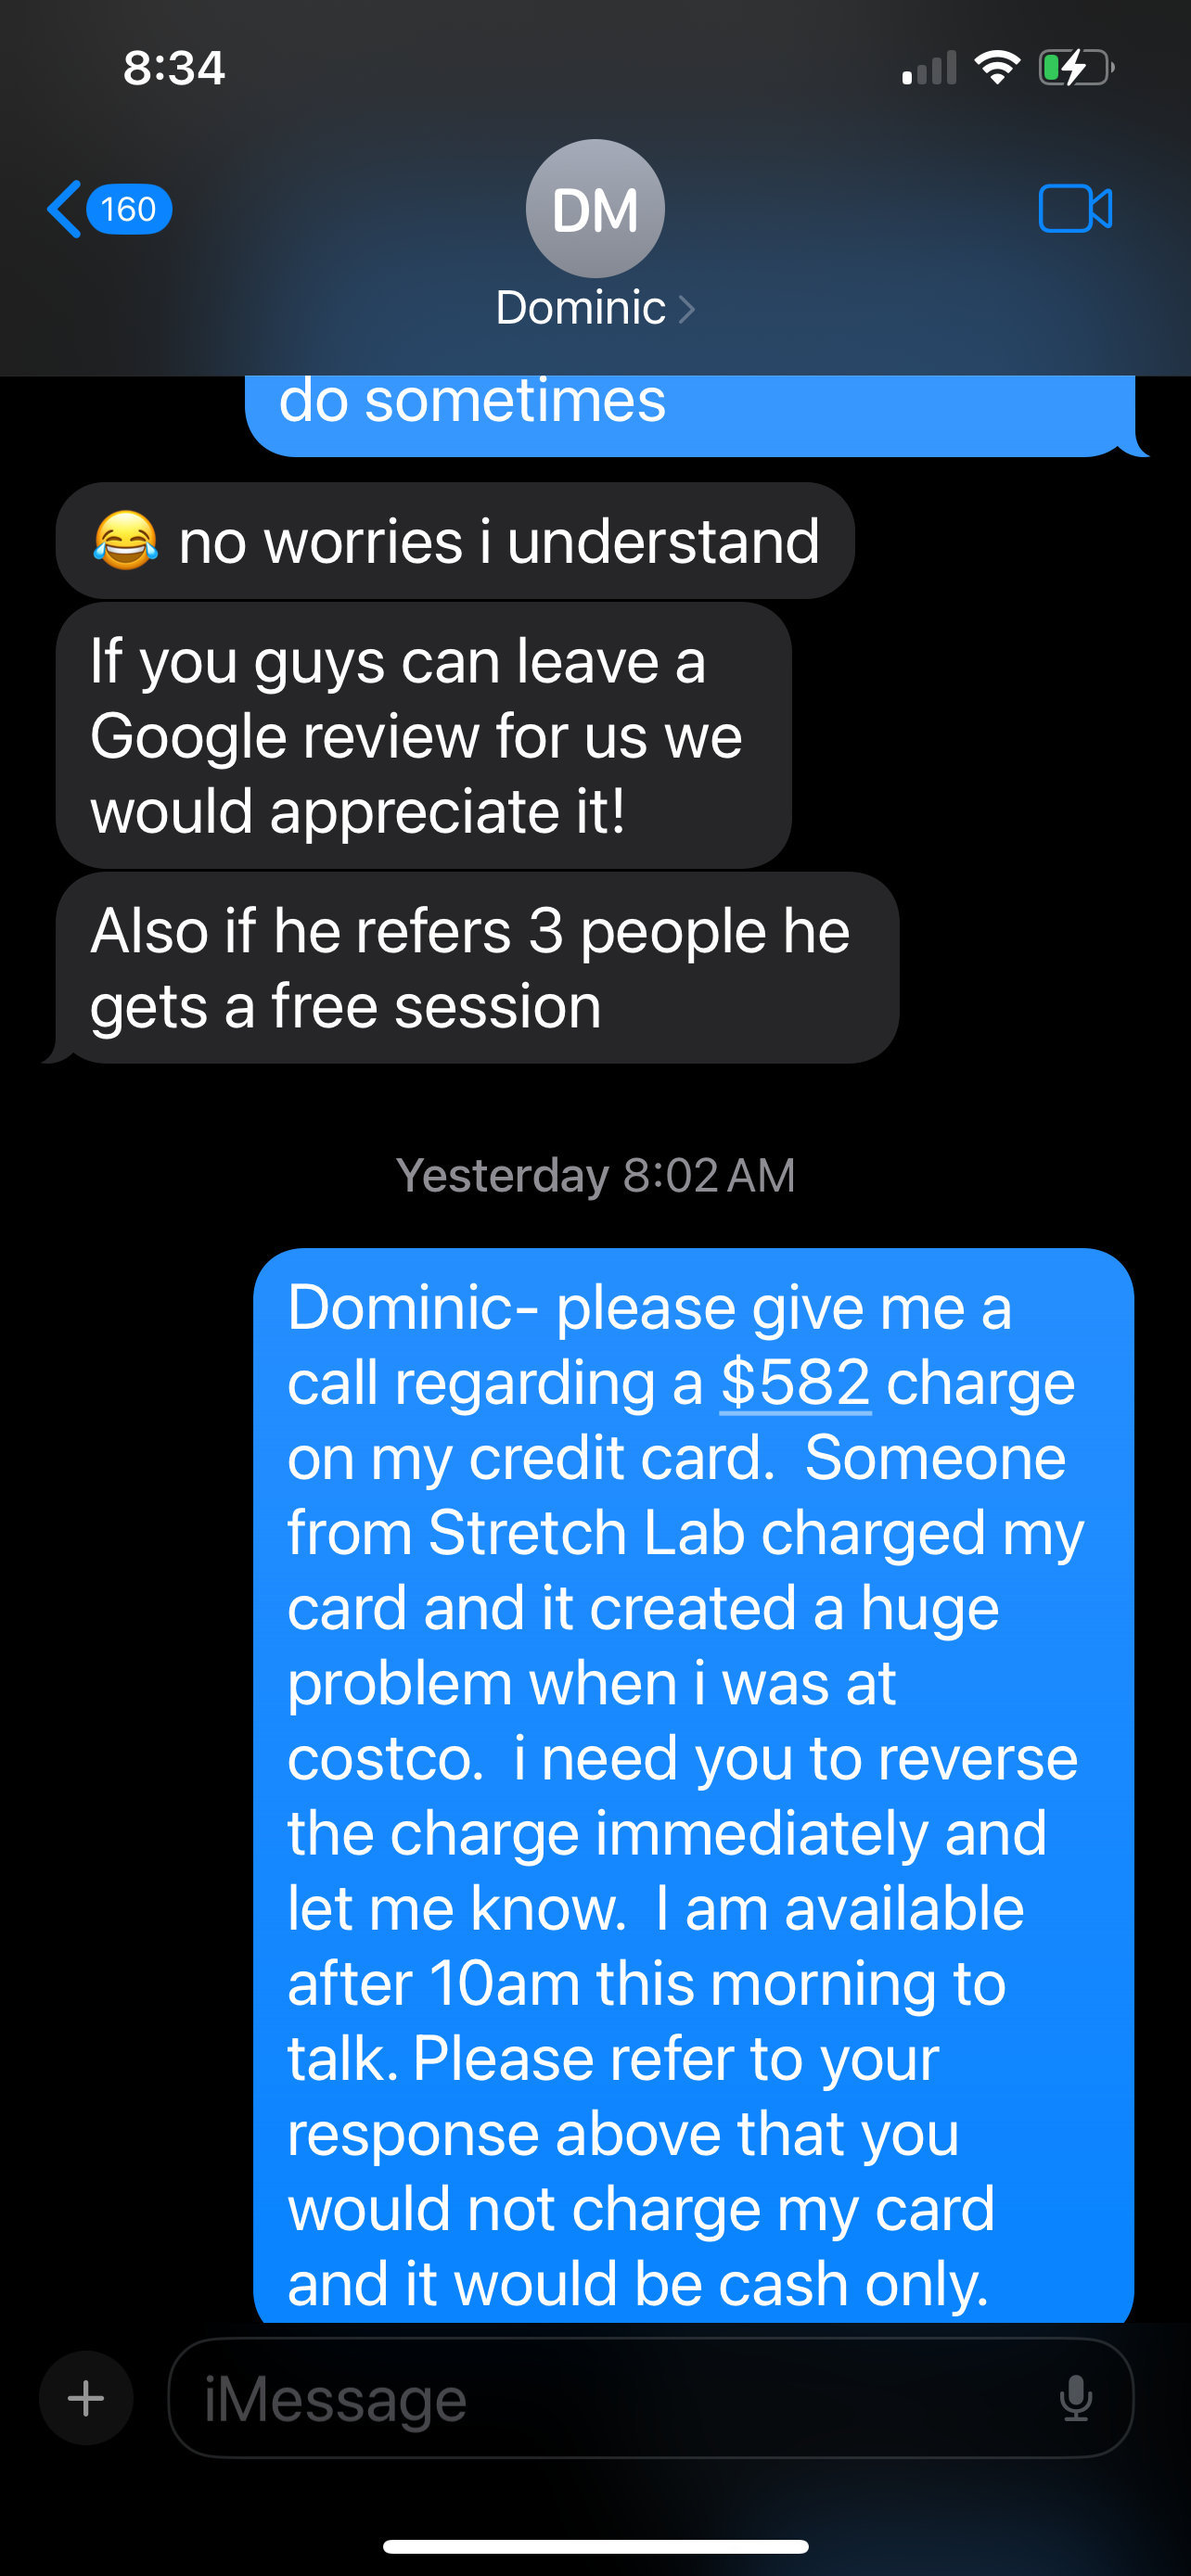 asking for google review- and $582 charge